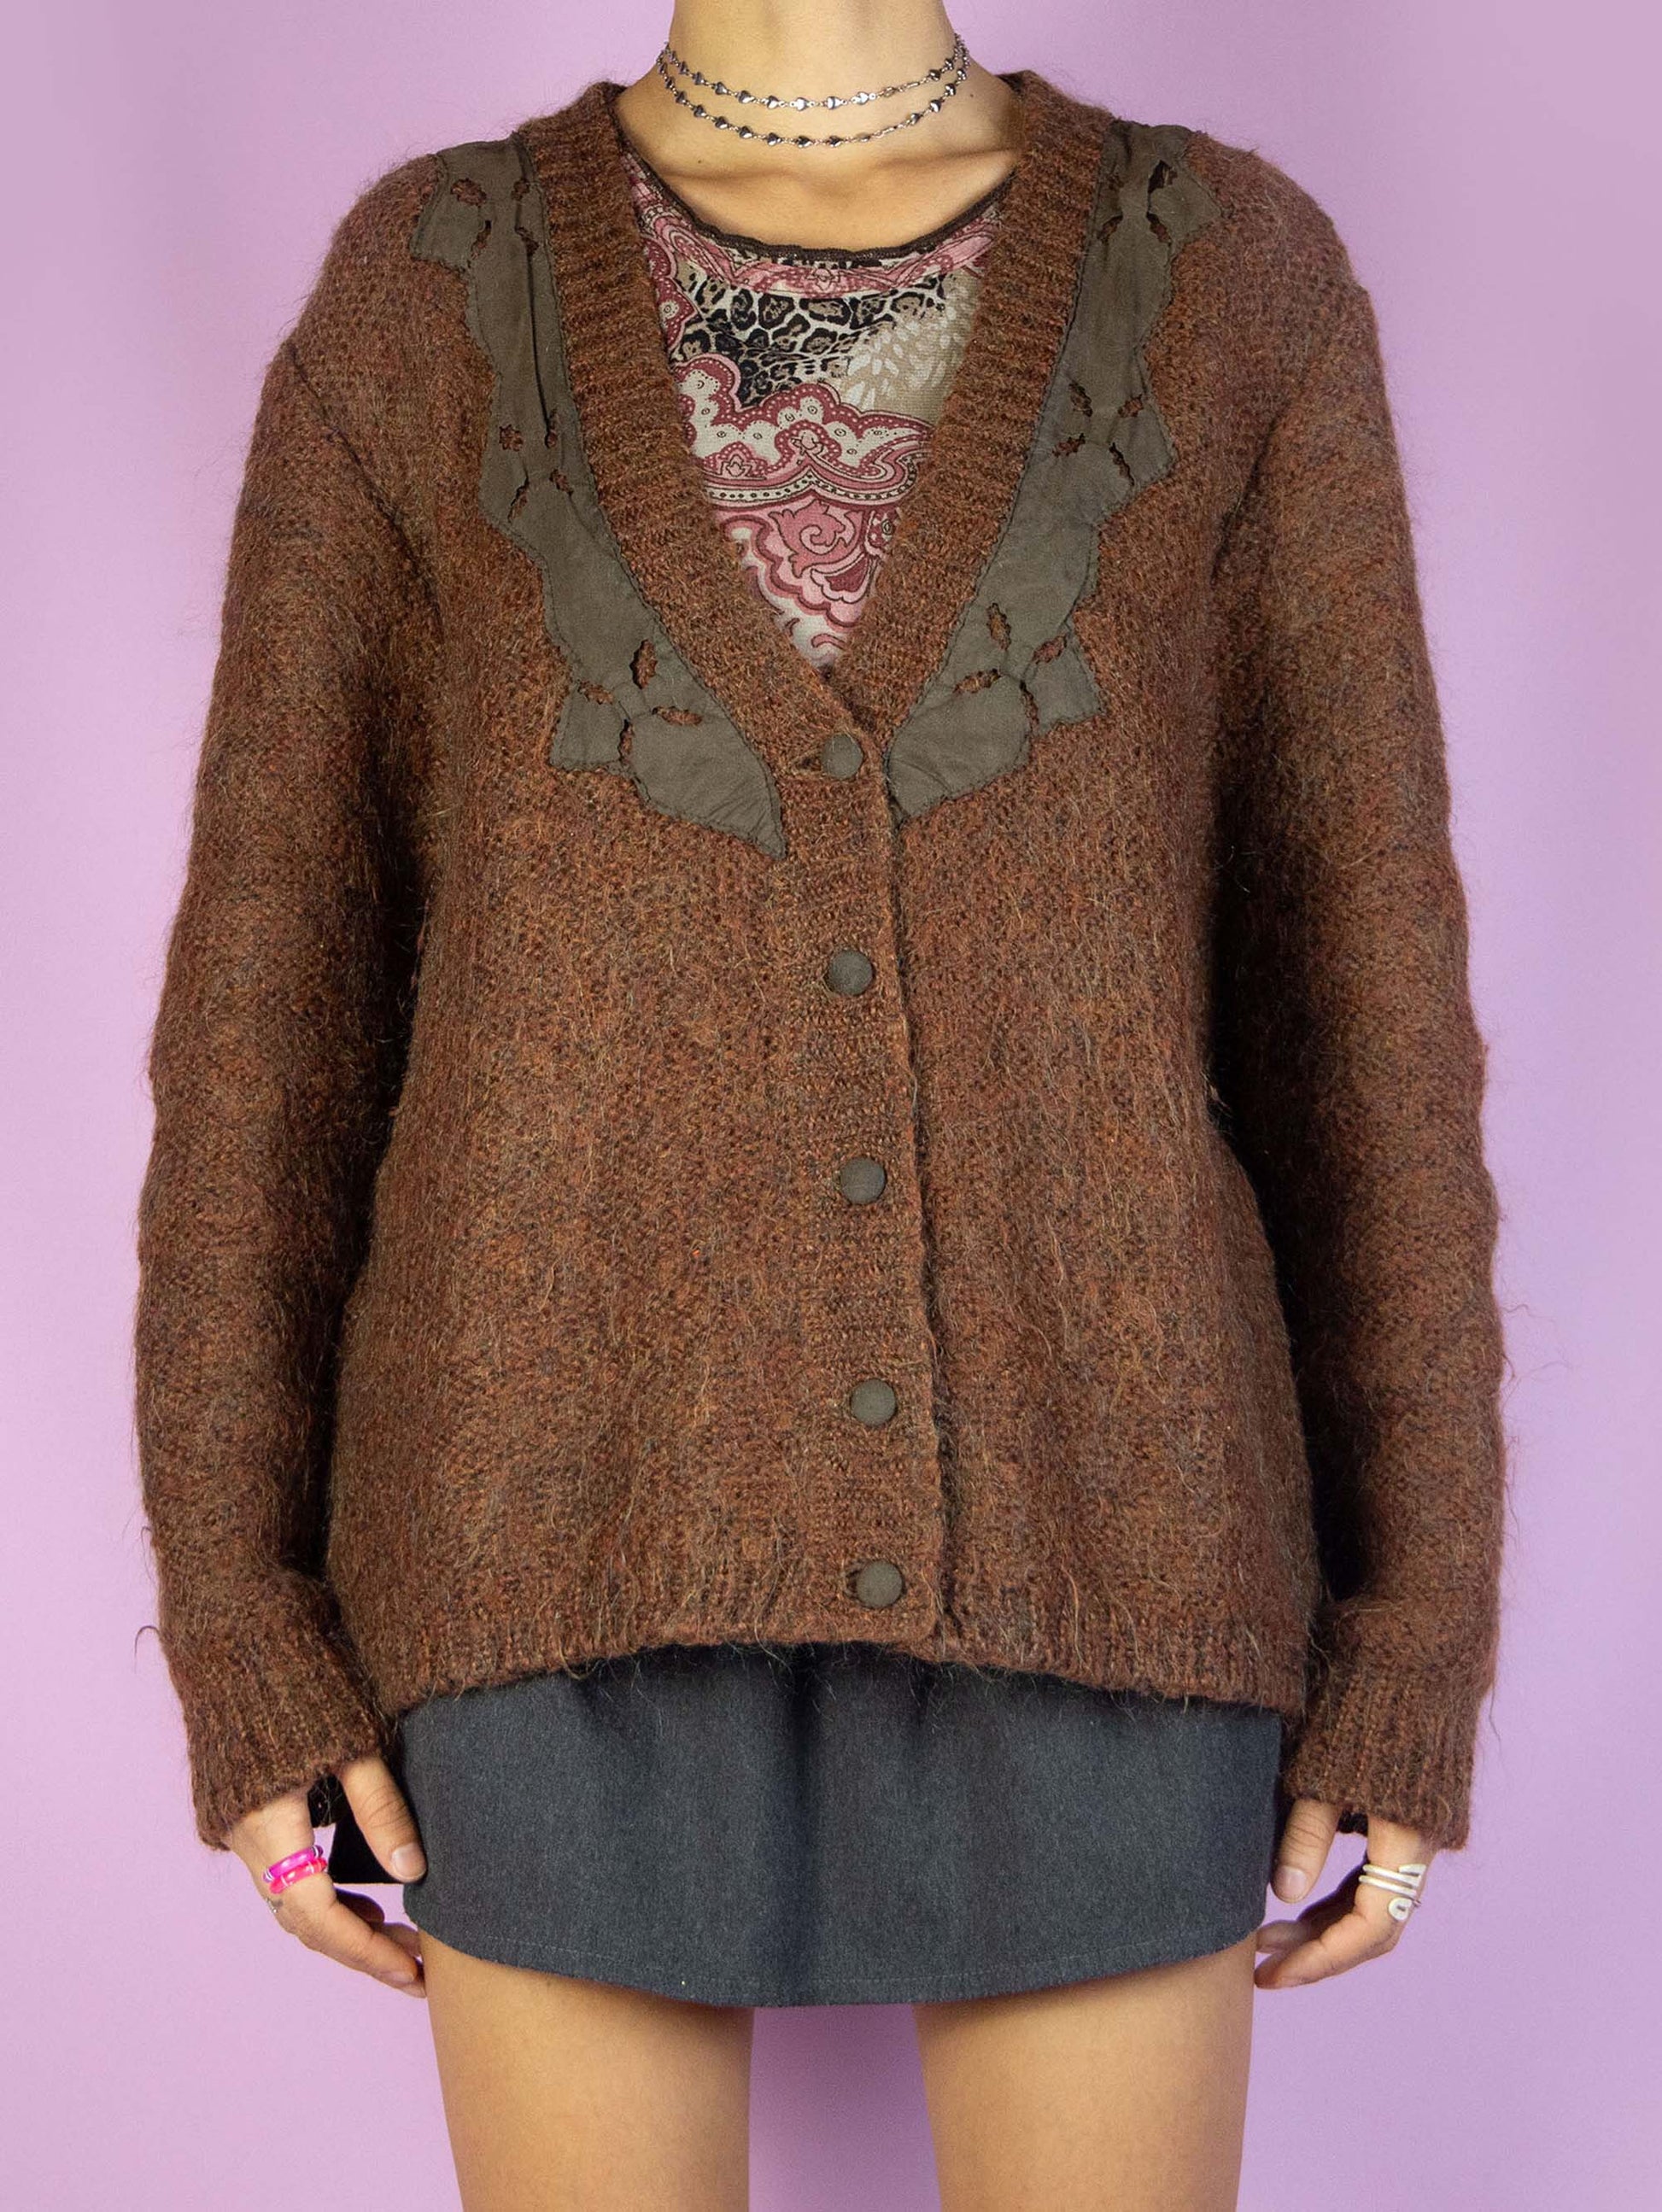 The Vintage 90s Brown Knit Cardigan is a winter V-neck cardigan sweater with buttons.